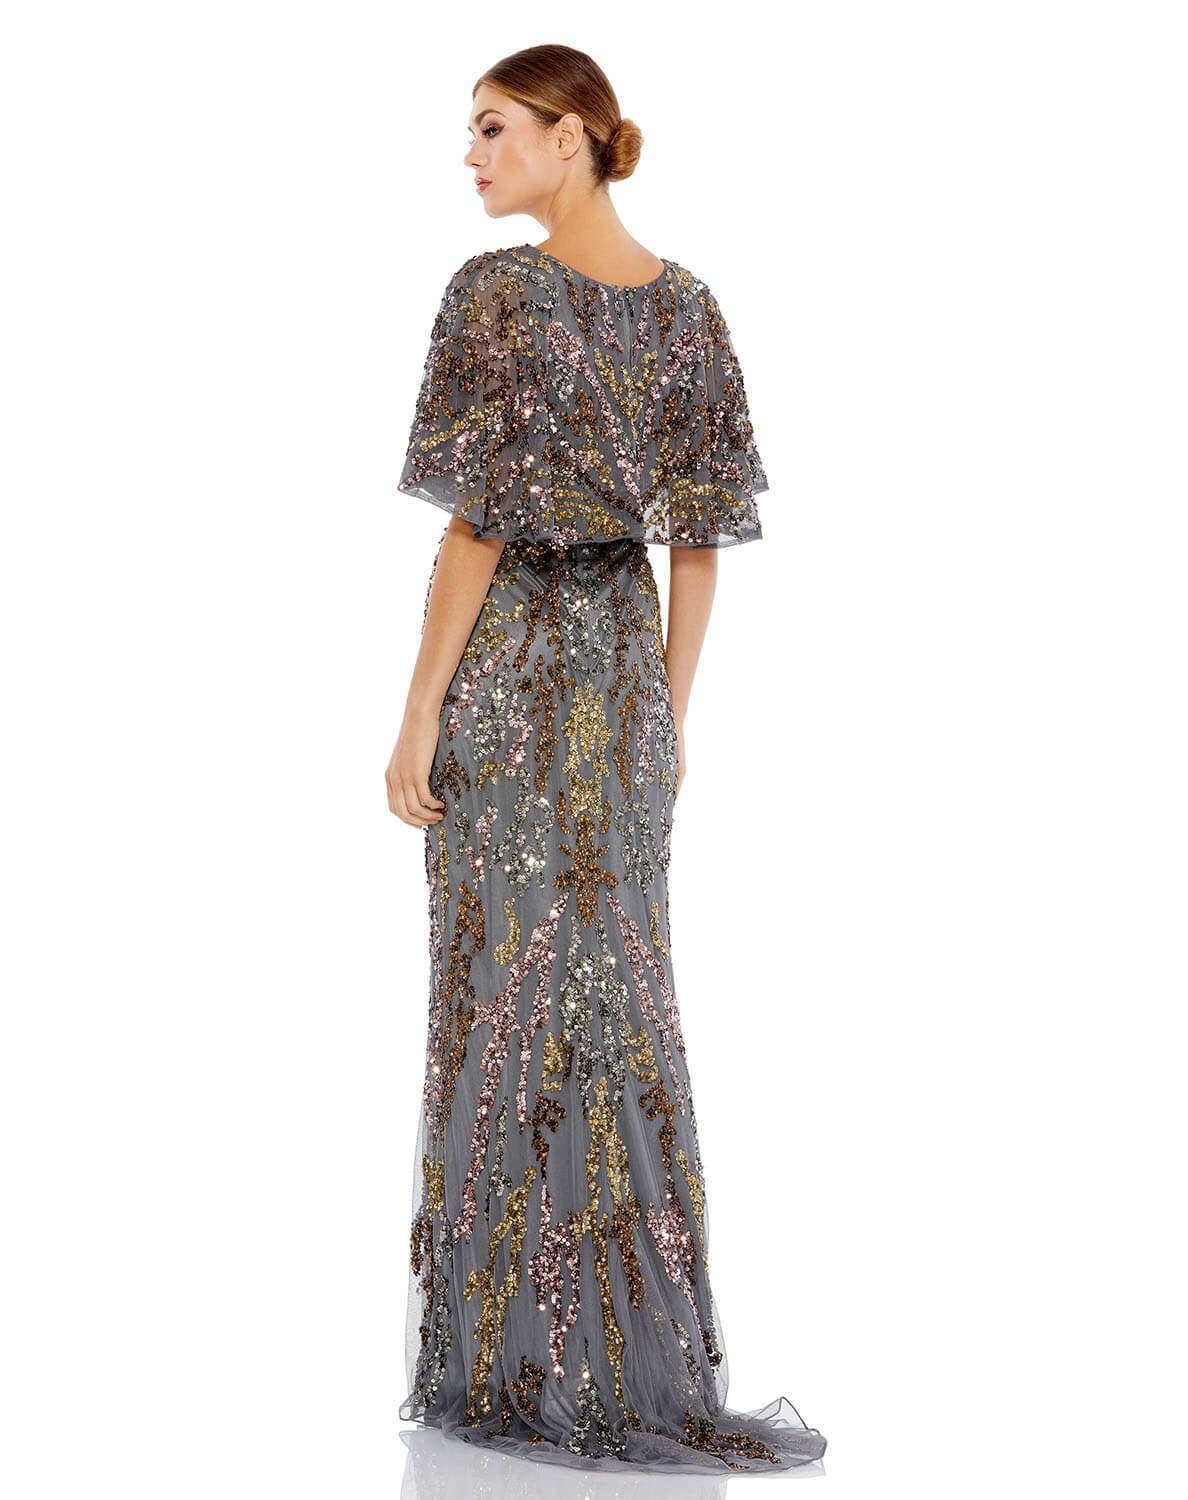 This striking evening gown features a low v-neckline, sequin-belted empire waist, short bell sleeves, and a cape-style back. The gown's mesh overlay is ornately embellished with abstractly-patterned sequins. Mac Duggal Fully Lined 100% Polyester V-Neck Sh